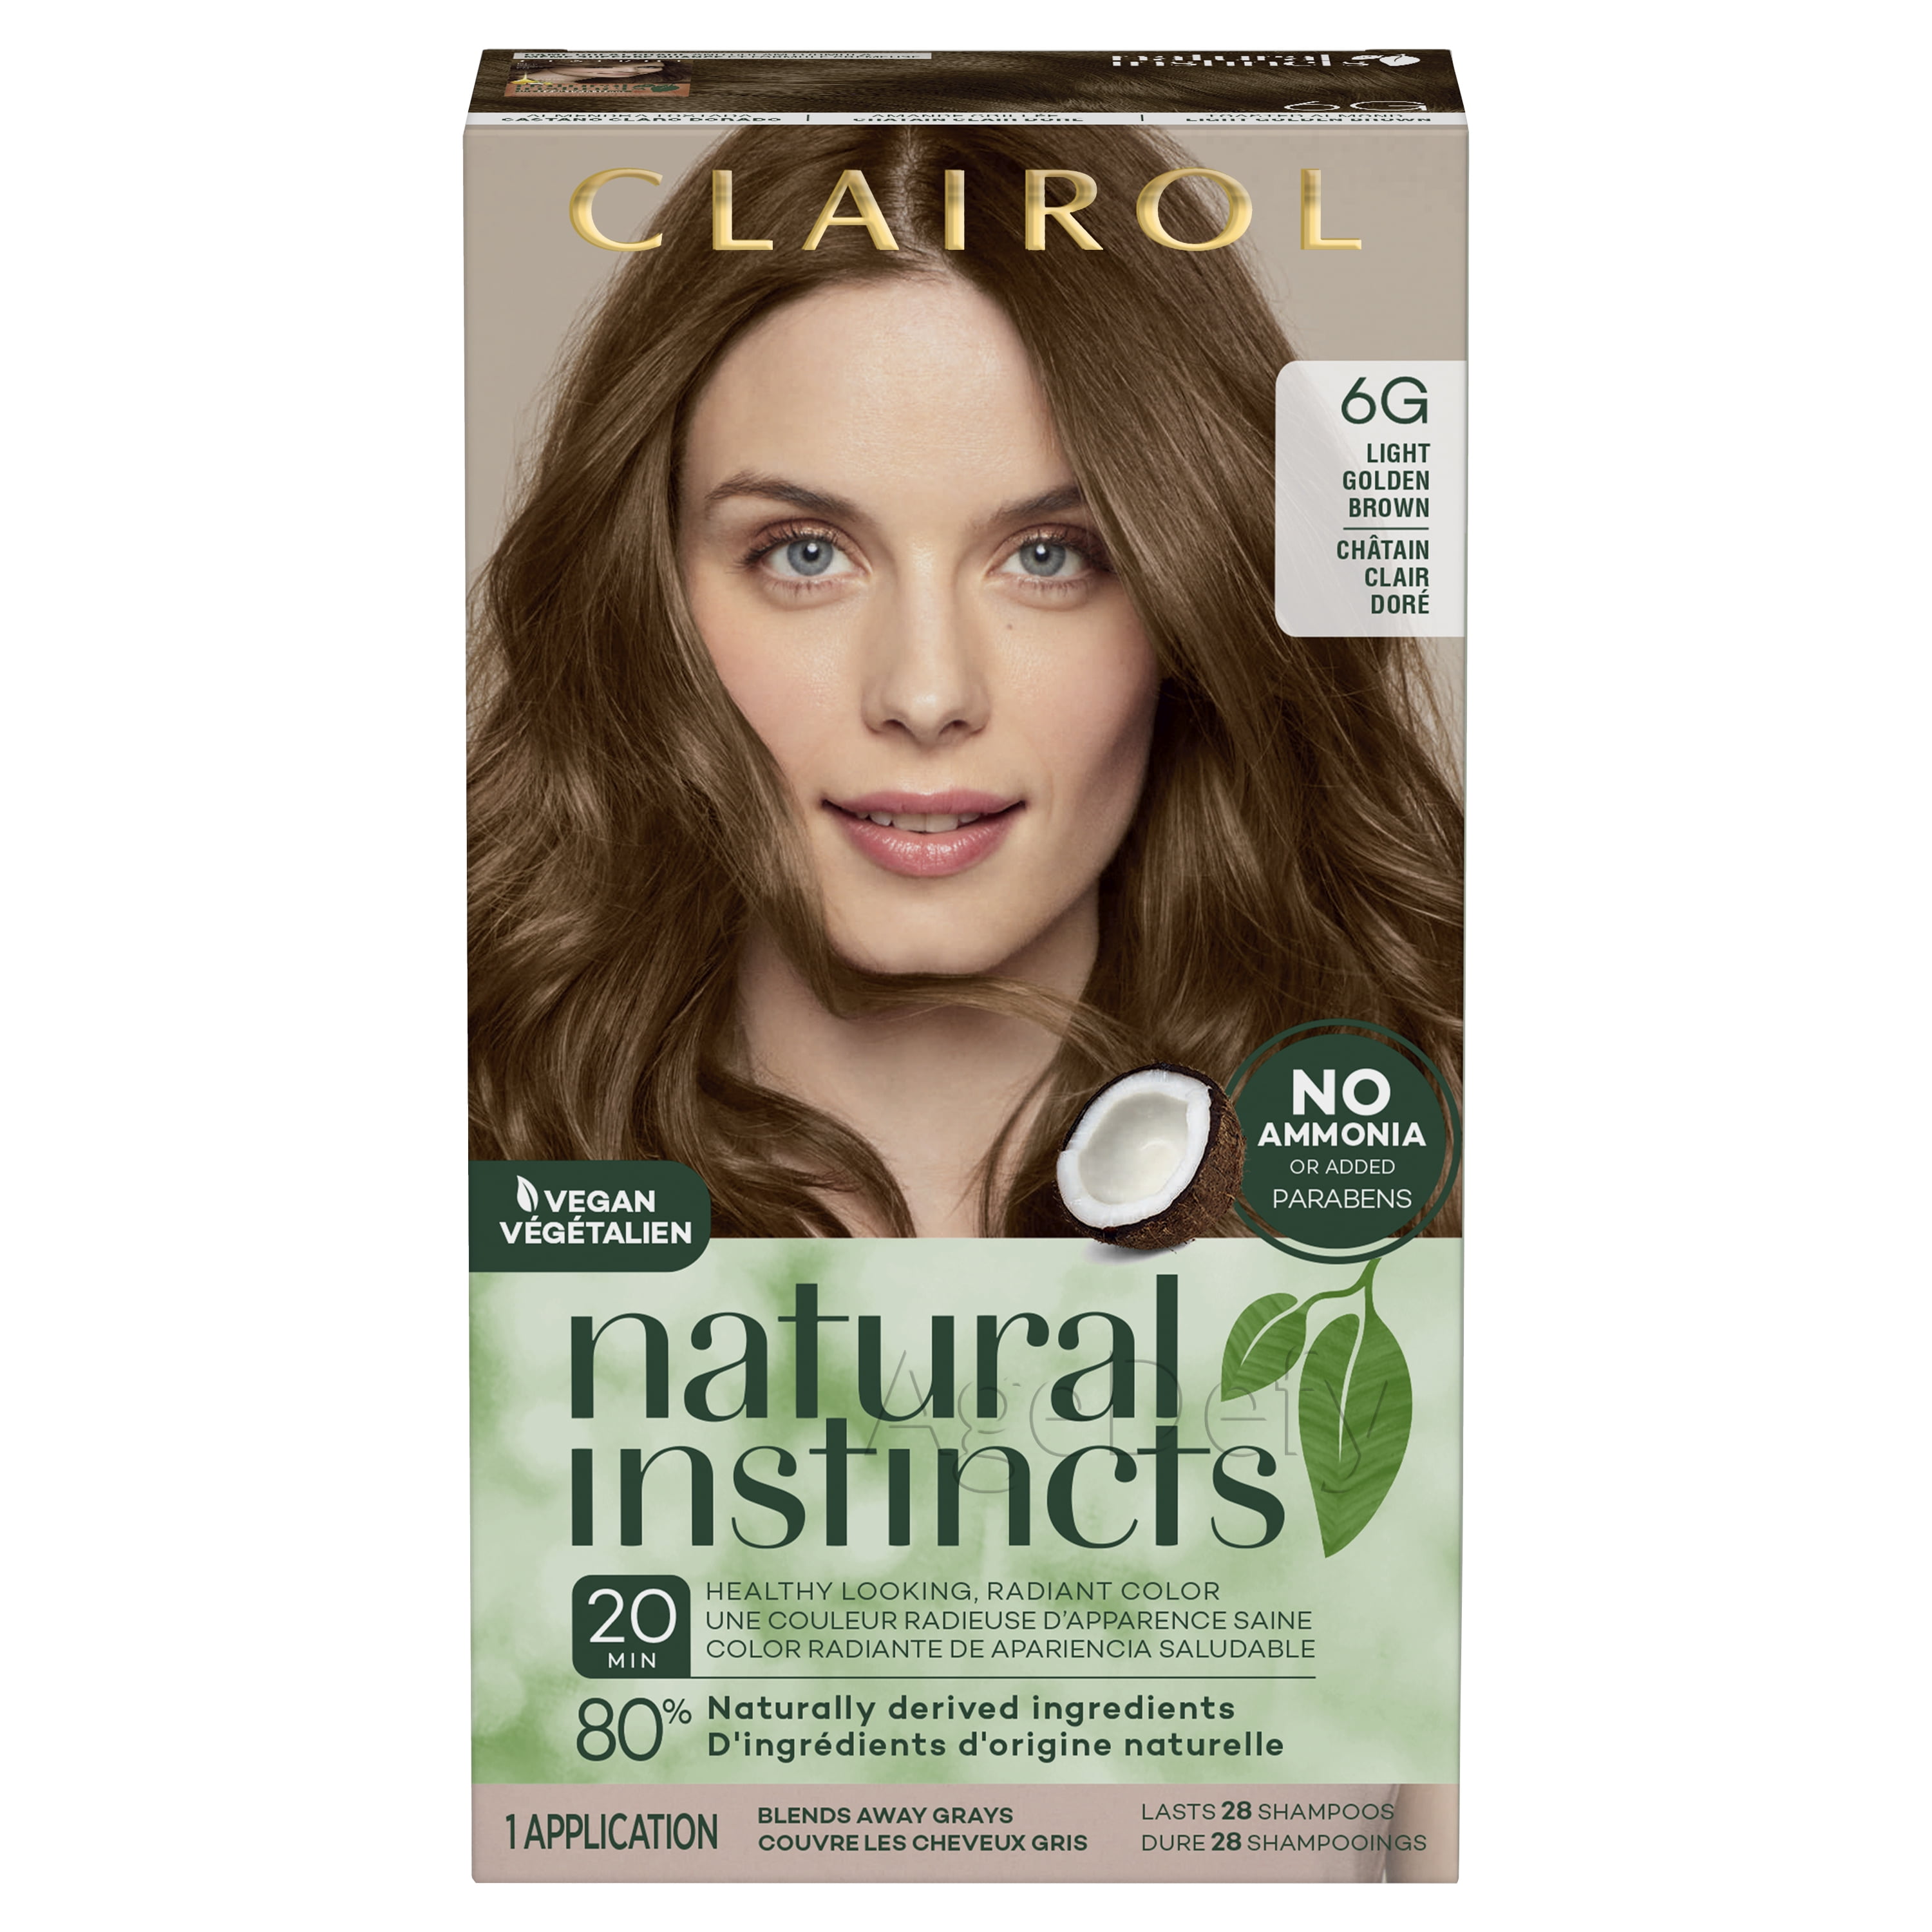 Clairol Natural Instincts Demi-Permanent Hair Color Creme, 6 Light Brown,  Hair Dye, 1 Application 